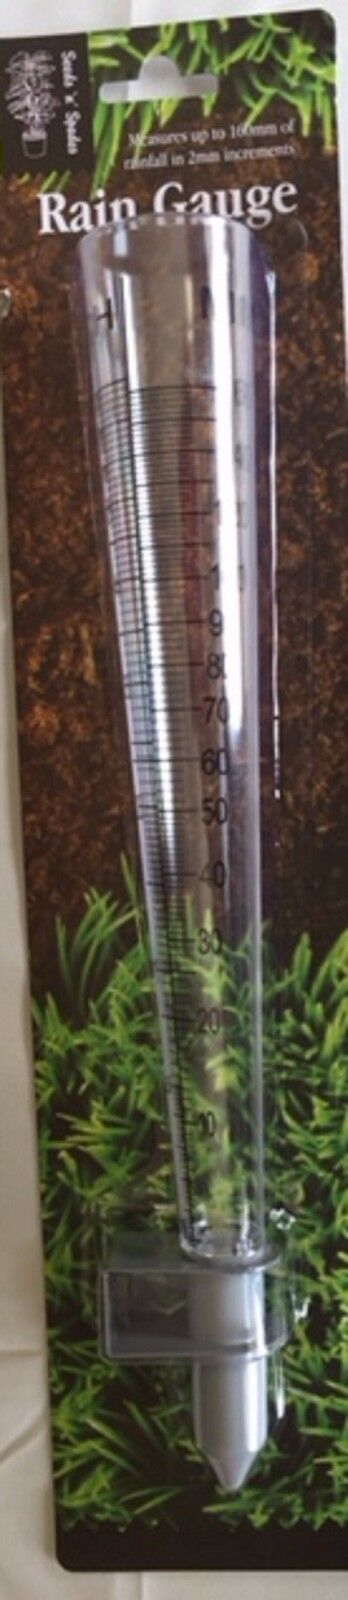 Rain Gauge 31 cm  measures up to 160 mm of Rainfall in 2 mm increments